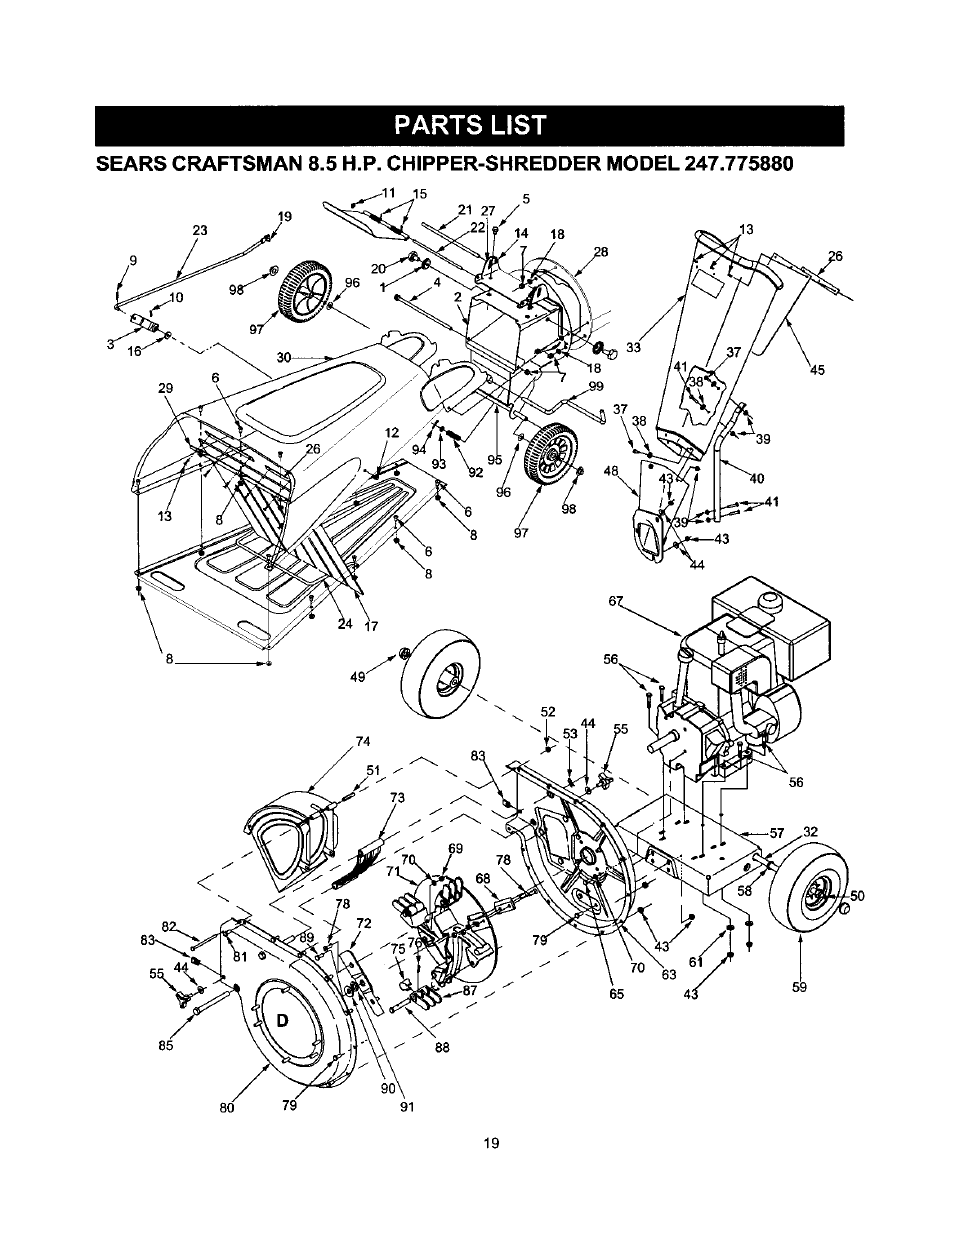 Parts list | Craftsman 247.775880 User Manual | Page 19 / 26